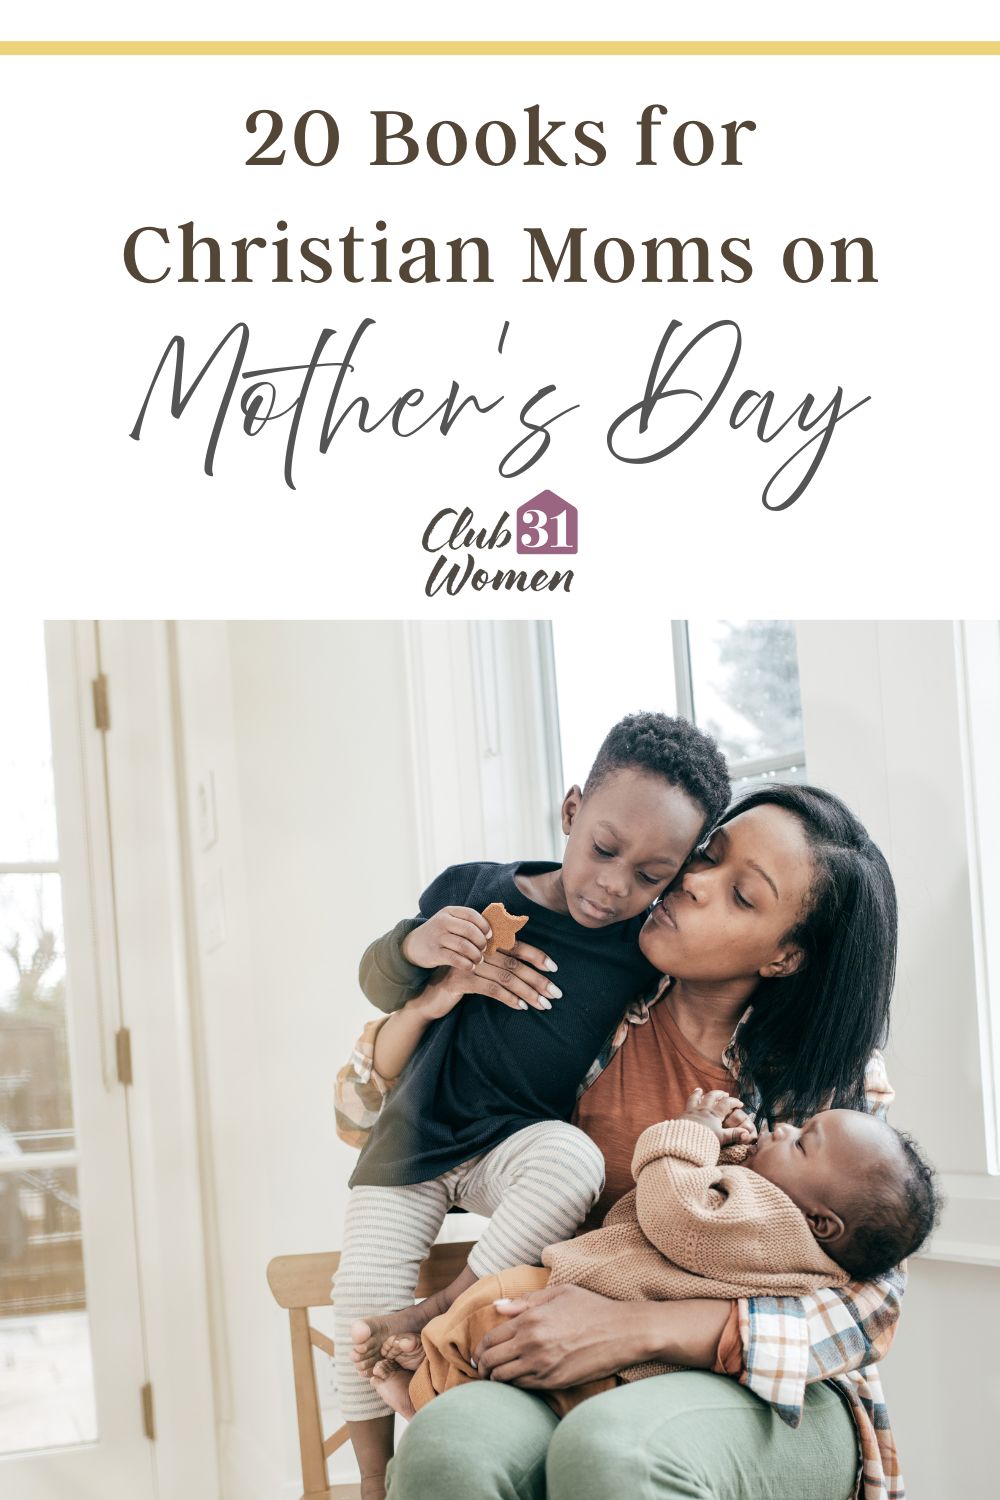 While having only one day to celebrate the mom in your life (or yourself!) is not enough, we love the chance to gather a few of our favorite books for Christian moms into one list. via @Club31Women